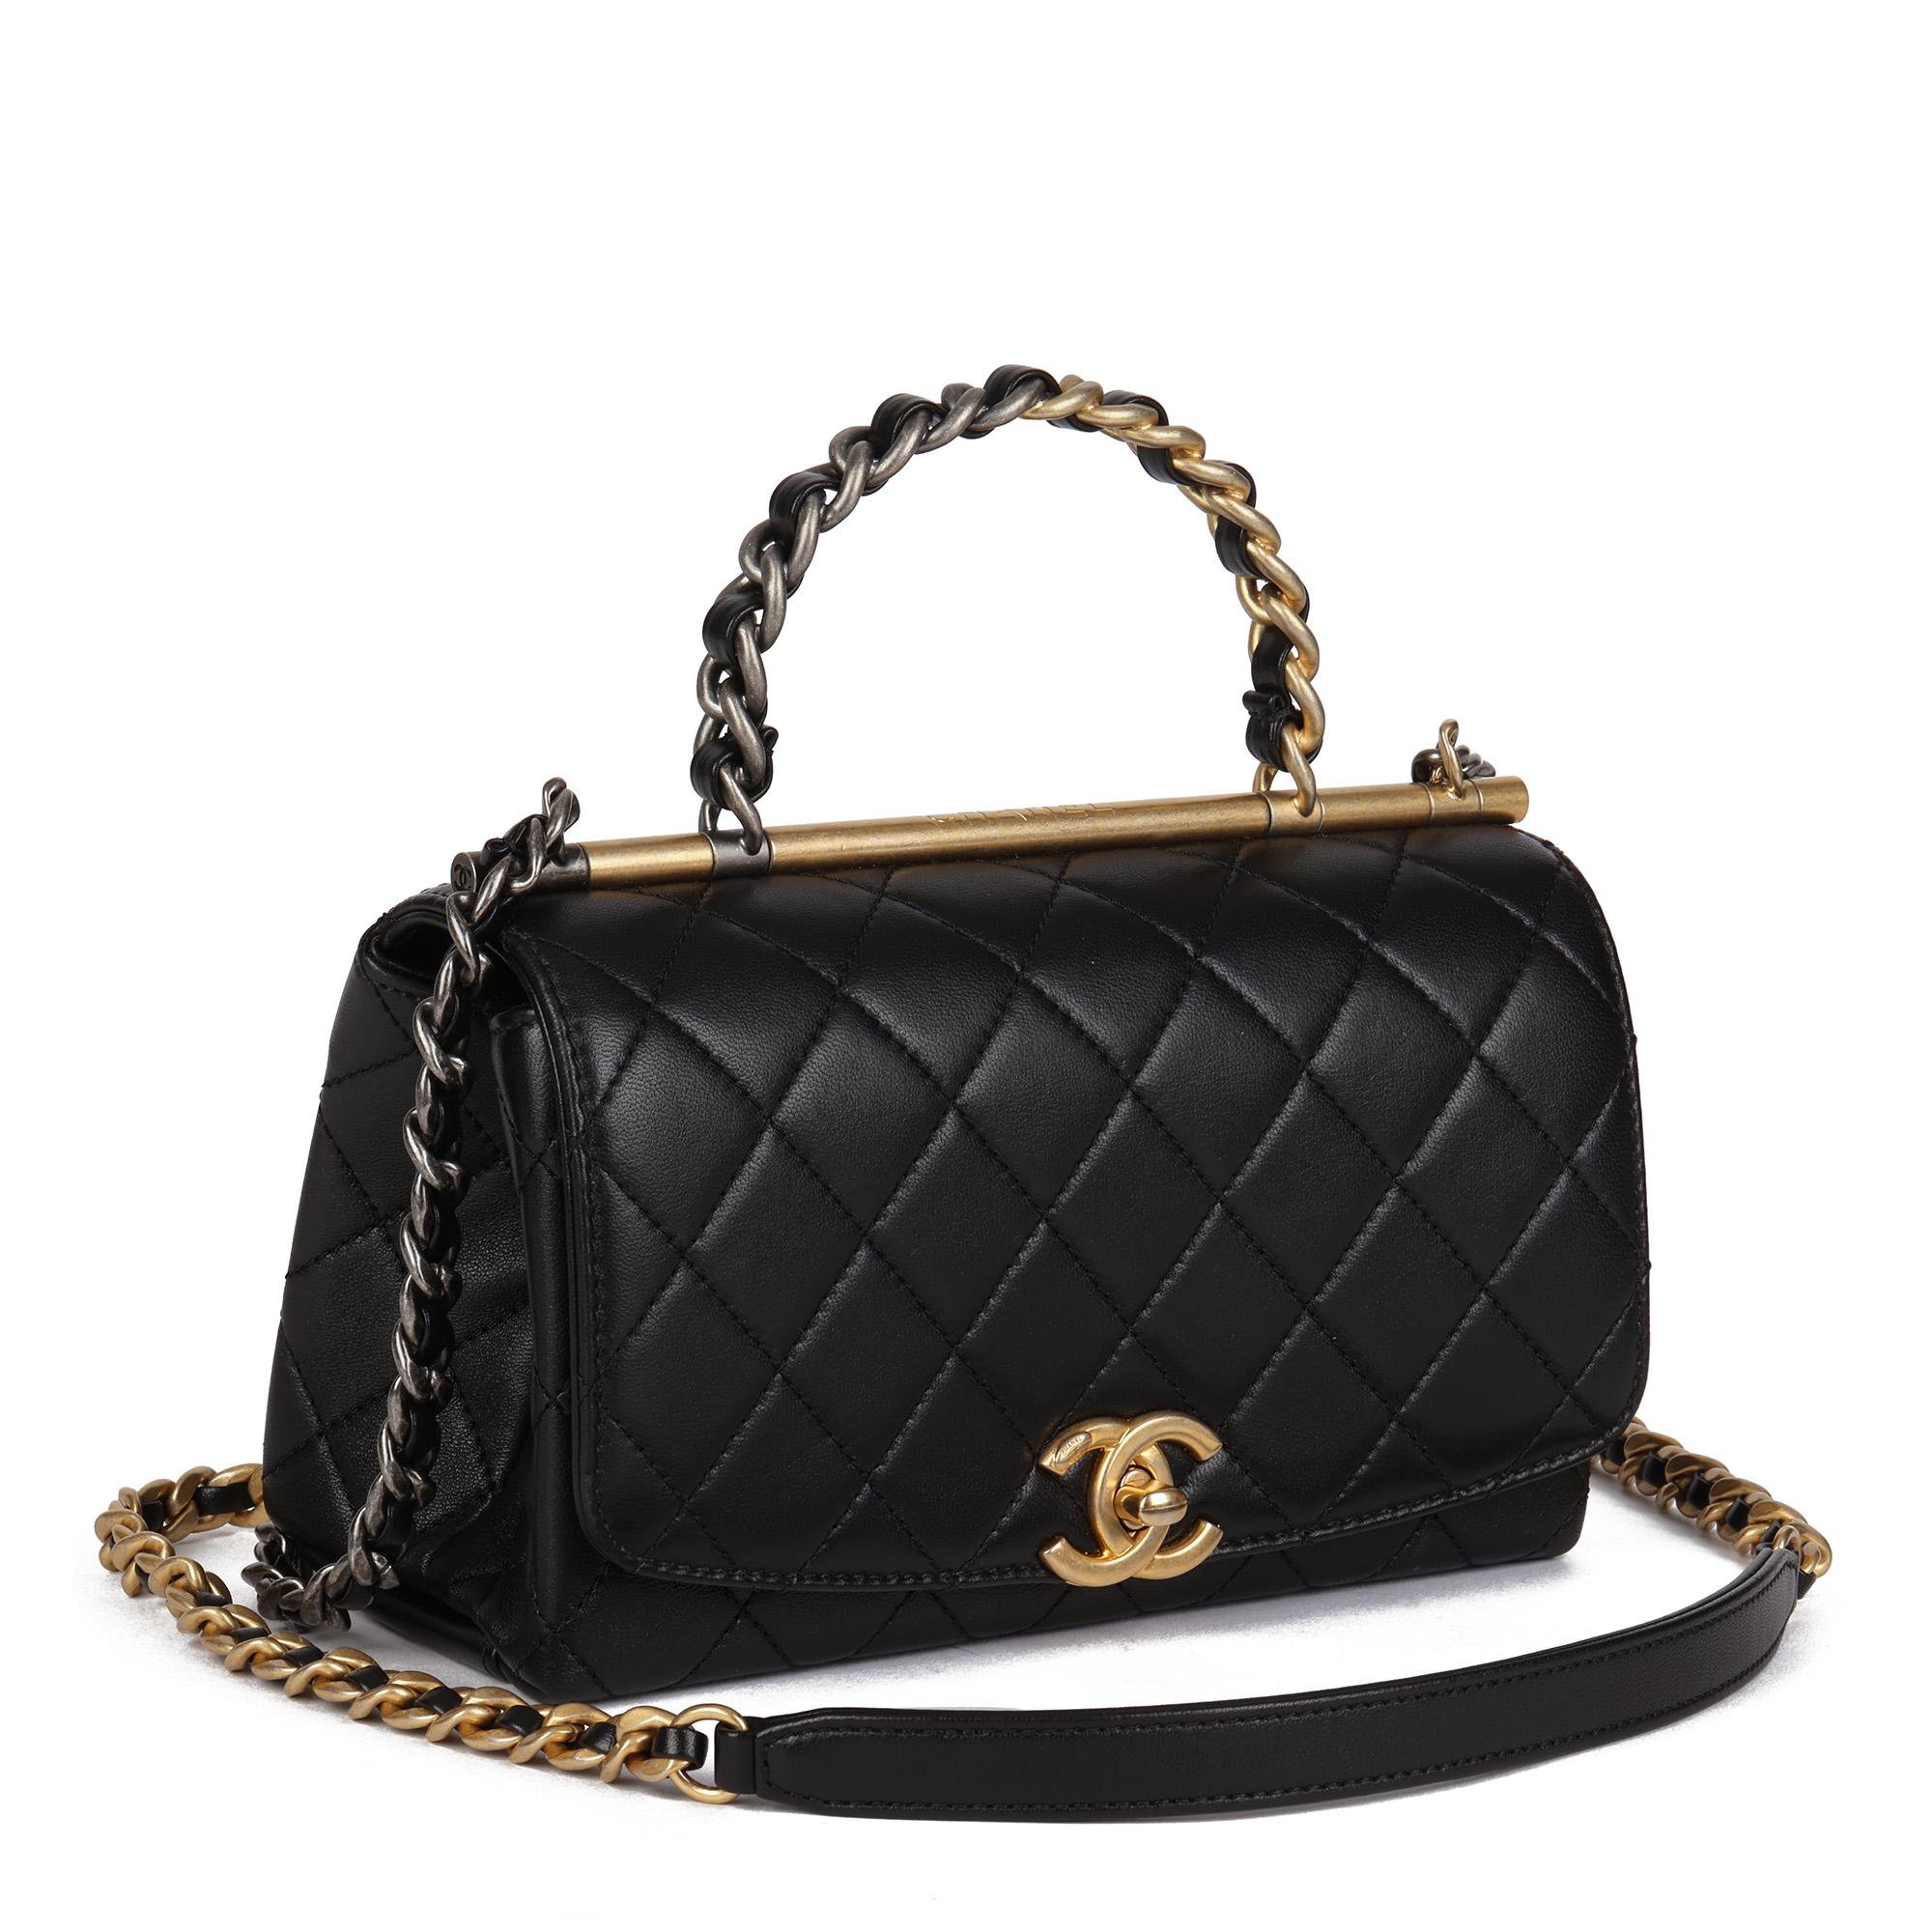 CHANEL
Black Quilted Lambskin Leather Small Classic Top Handle Flap Bag

Xupes Reference: HB4426
Serial Number: 29970067
Age (Circa): 2021
Accompanied By: Chanel Dust Bag, Authenticity Card
Authenticity Details: Authenticity Card, Serial Sticker